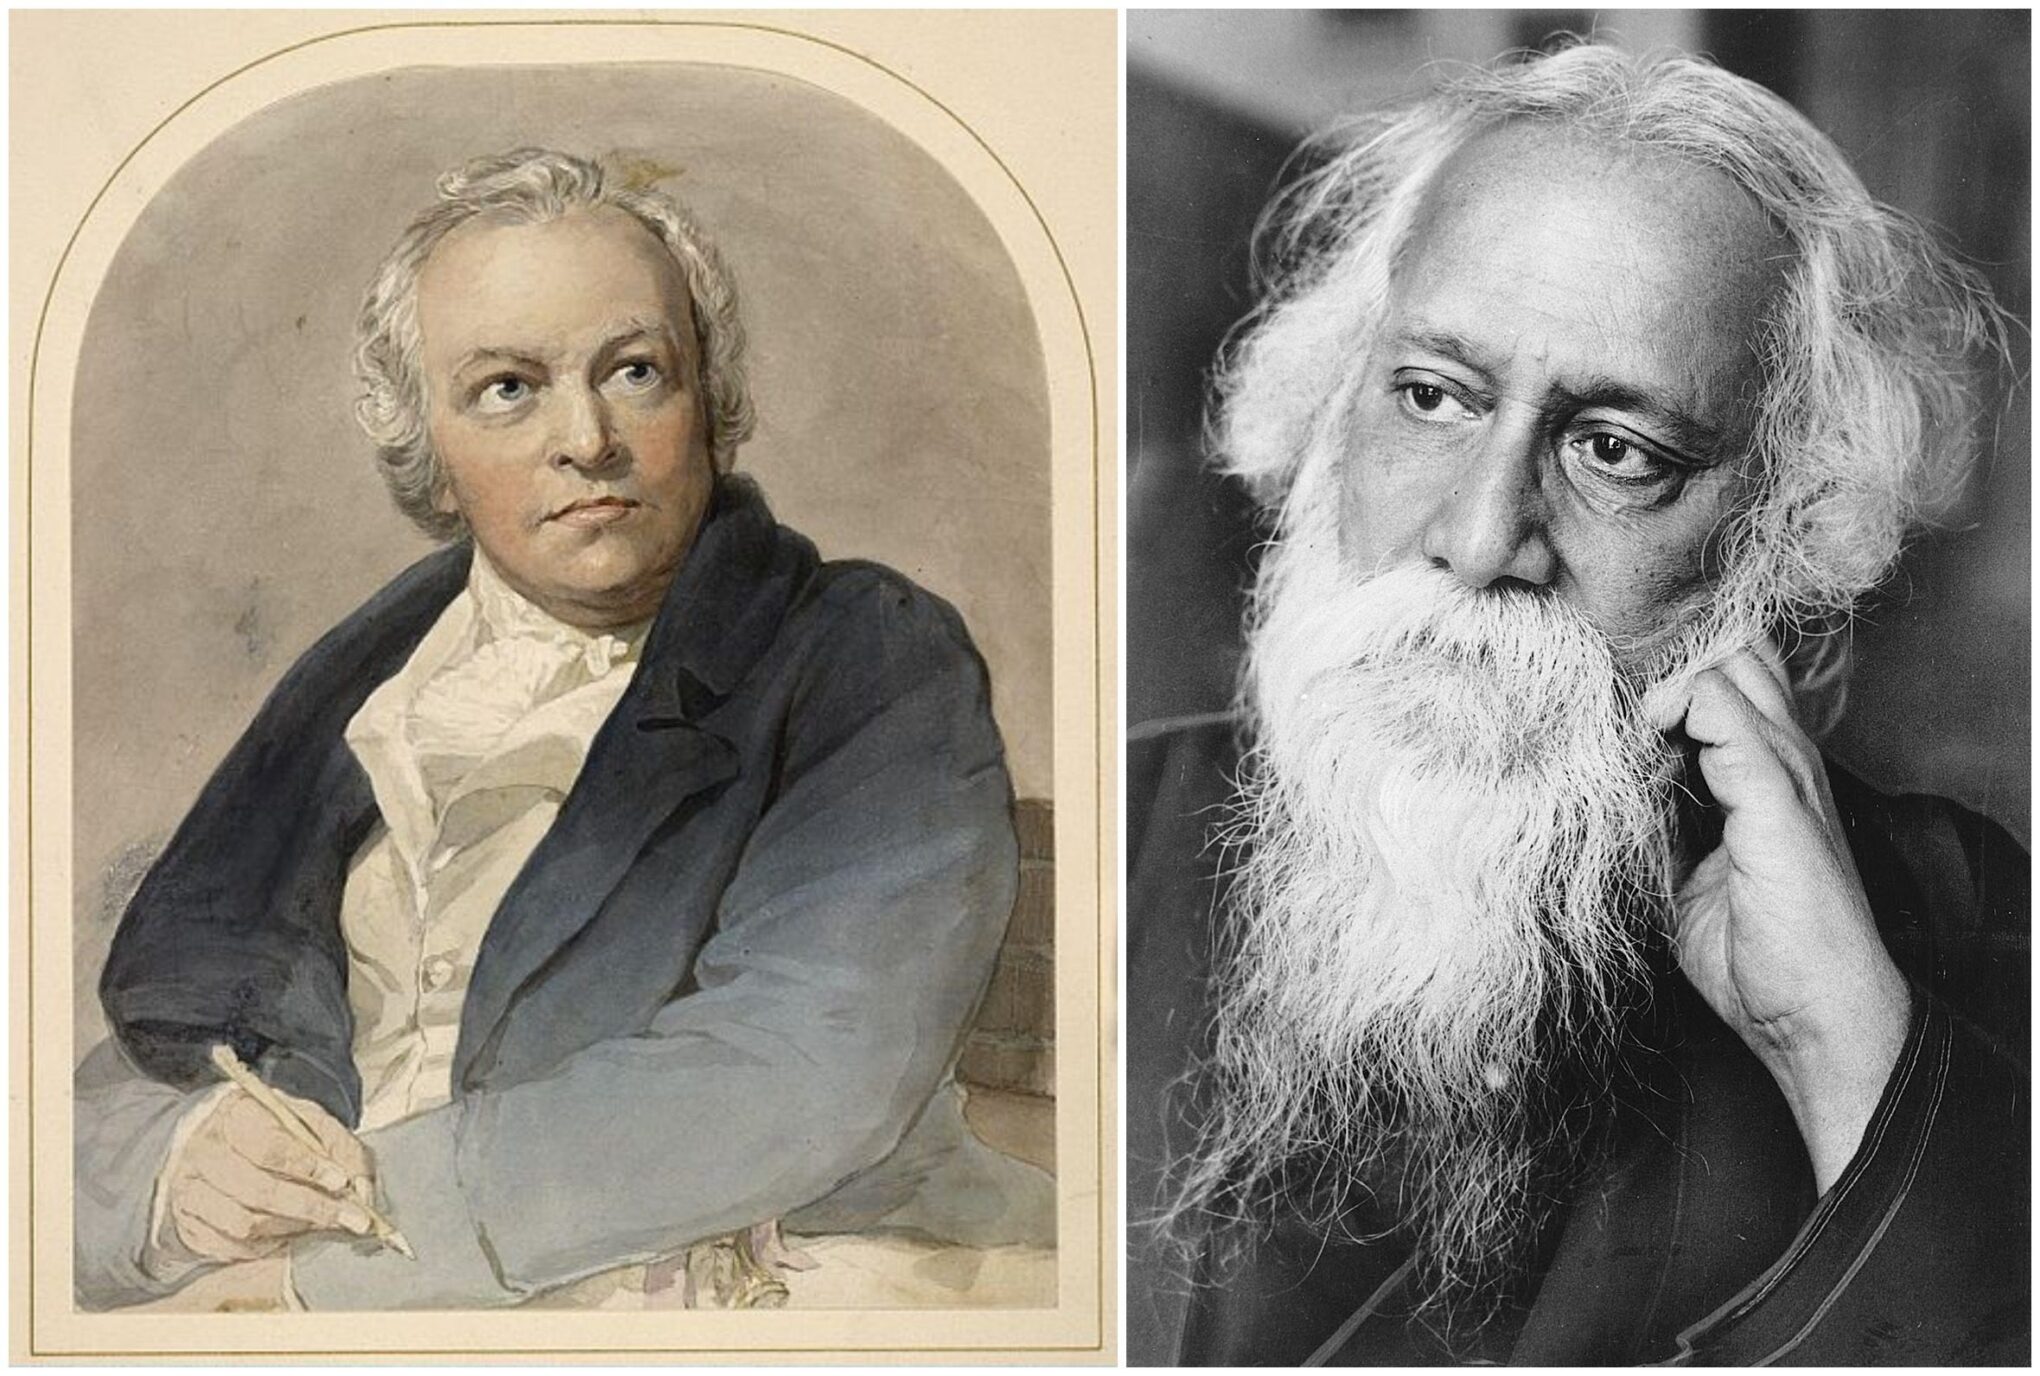 Africa: William Blake and Rabindranath Tagore - Different Truths